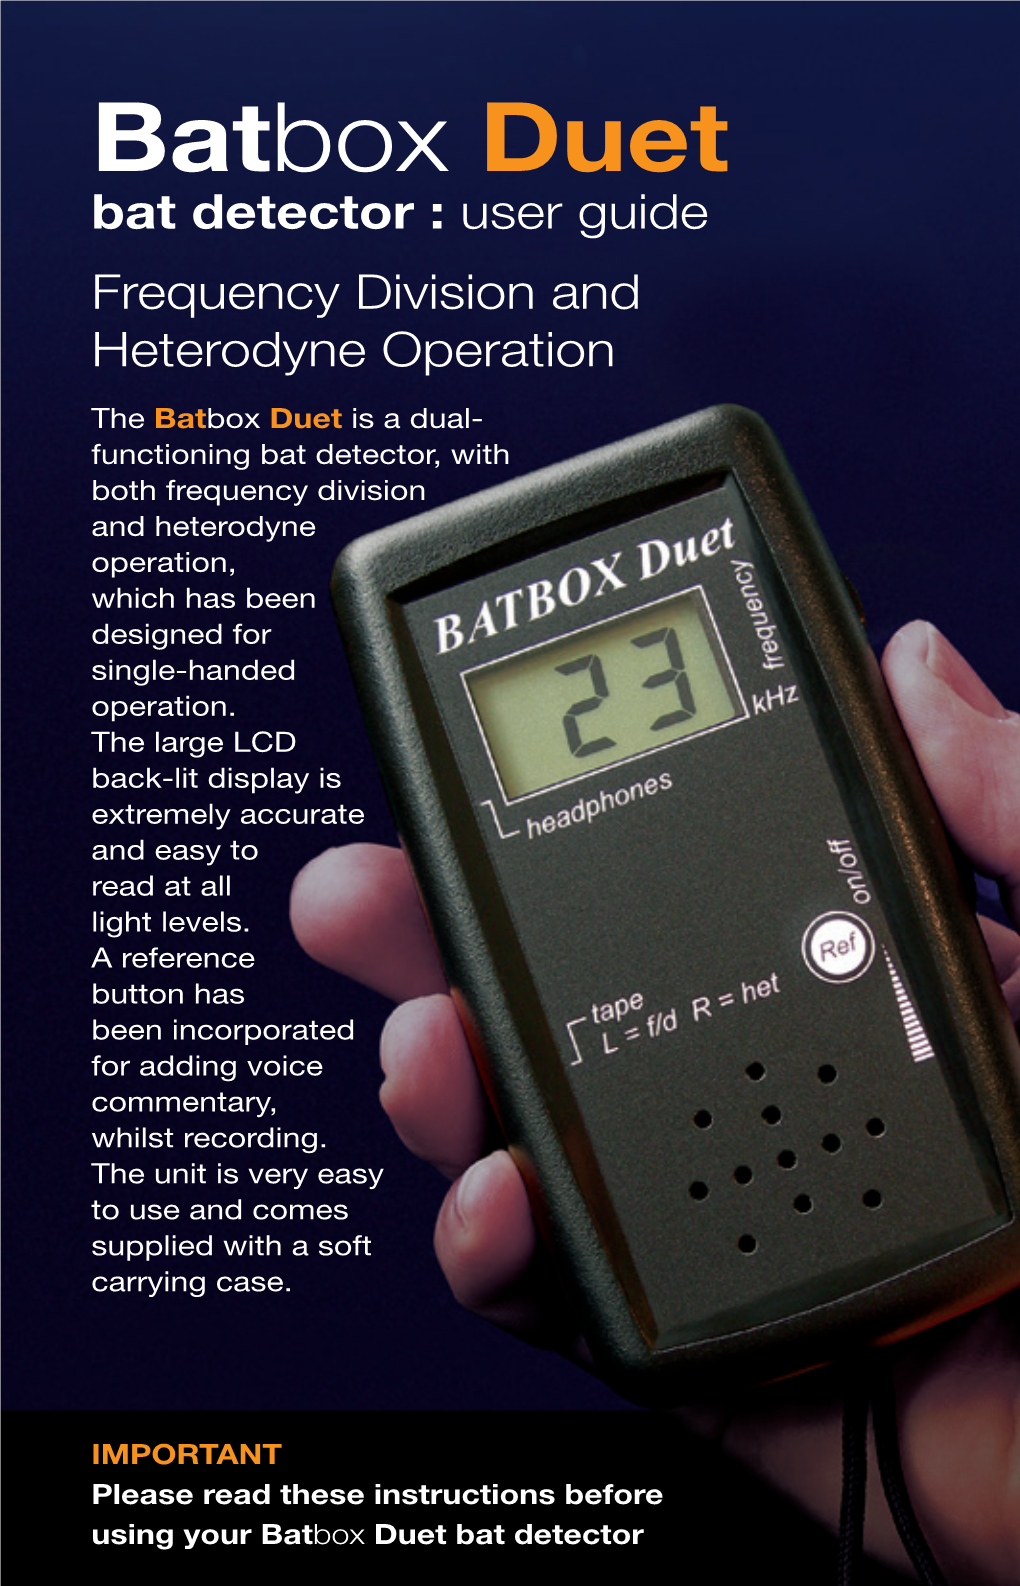 Batbox Duet Bat Detector : User Guide Frequency Division and Heterodyne Operation